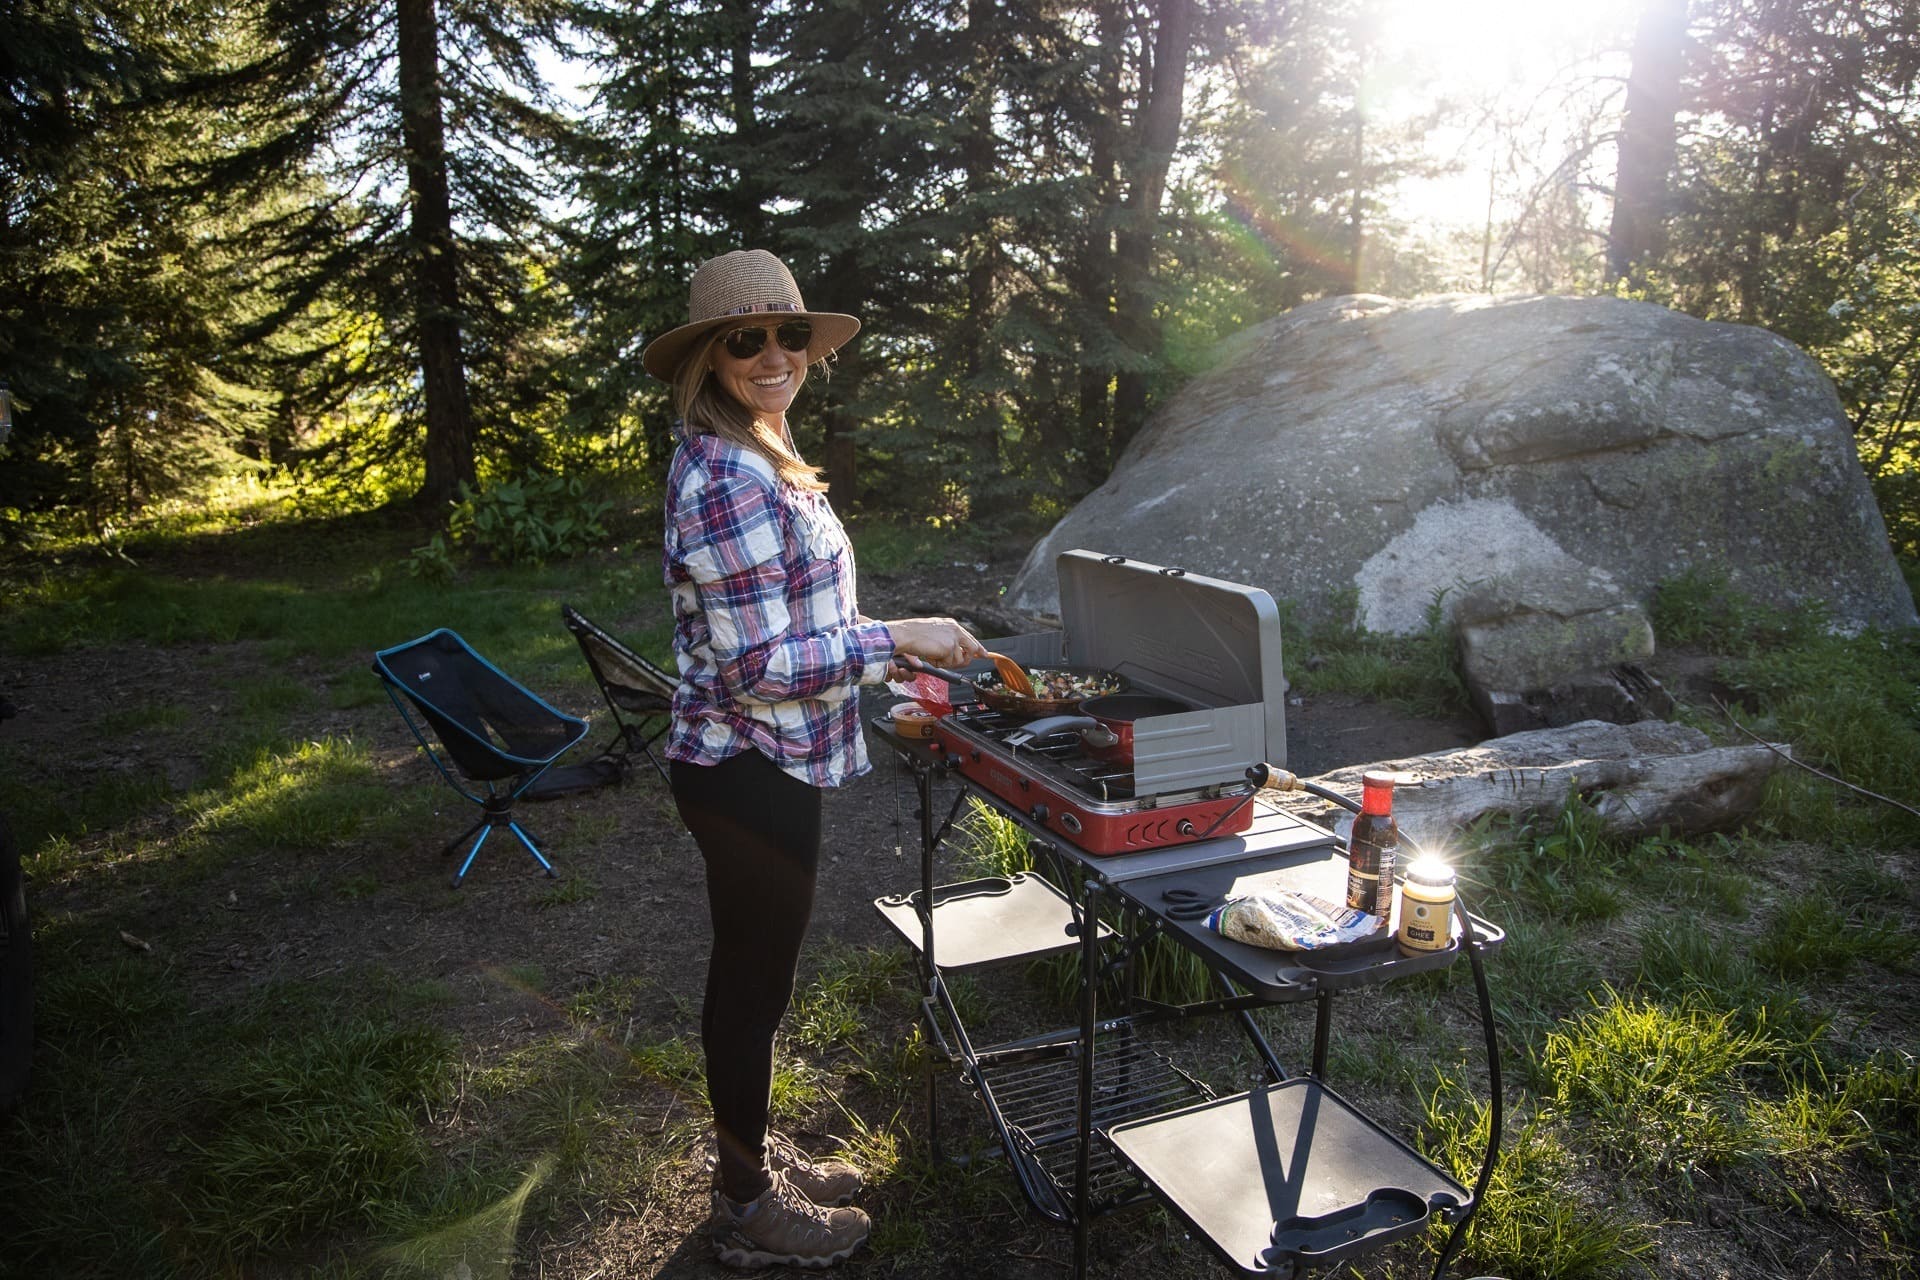 Tips and advice on how to successfully introduce your partner to camping for the first time.